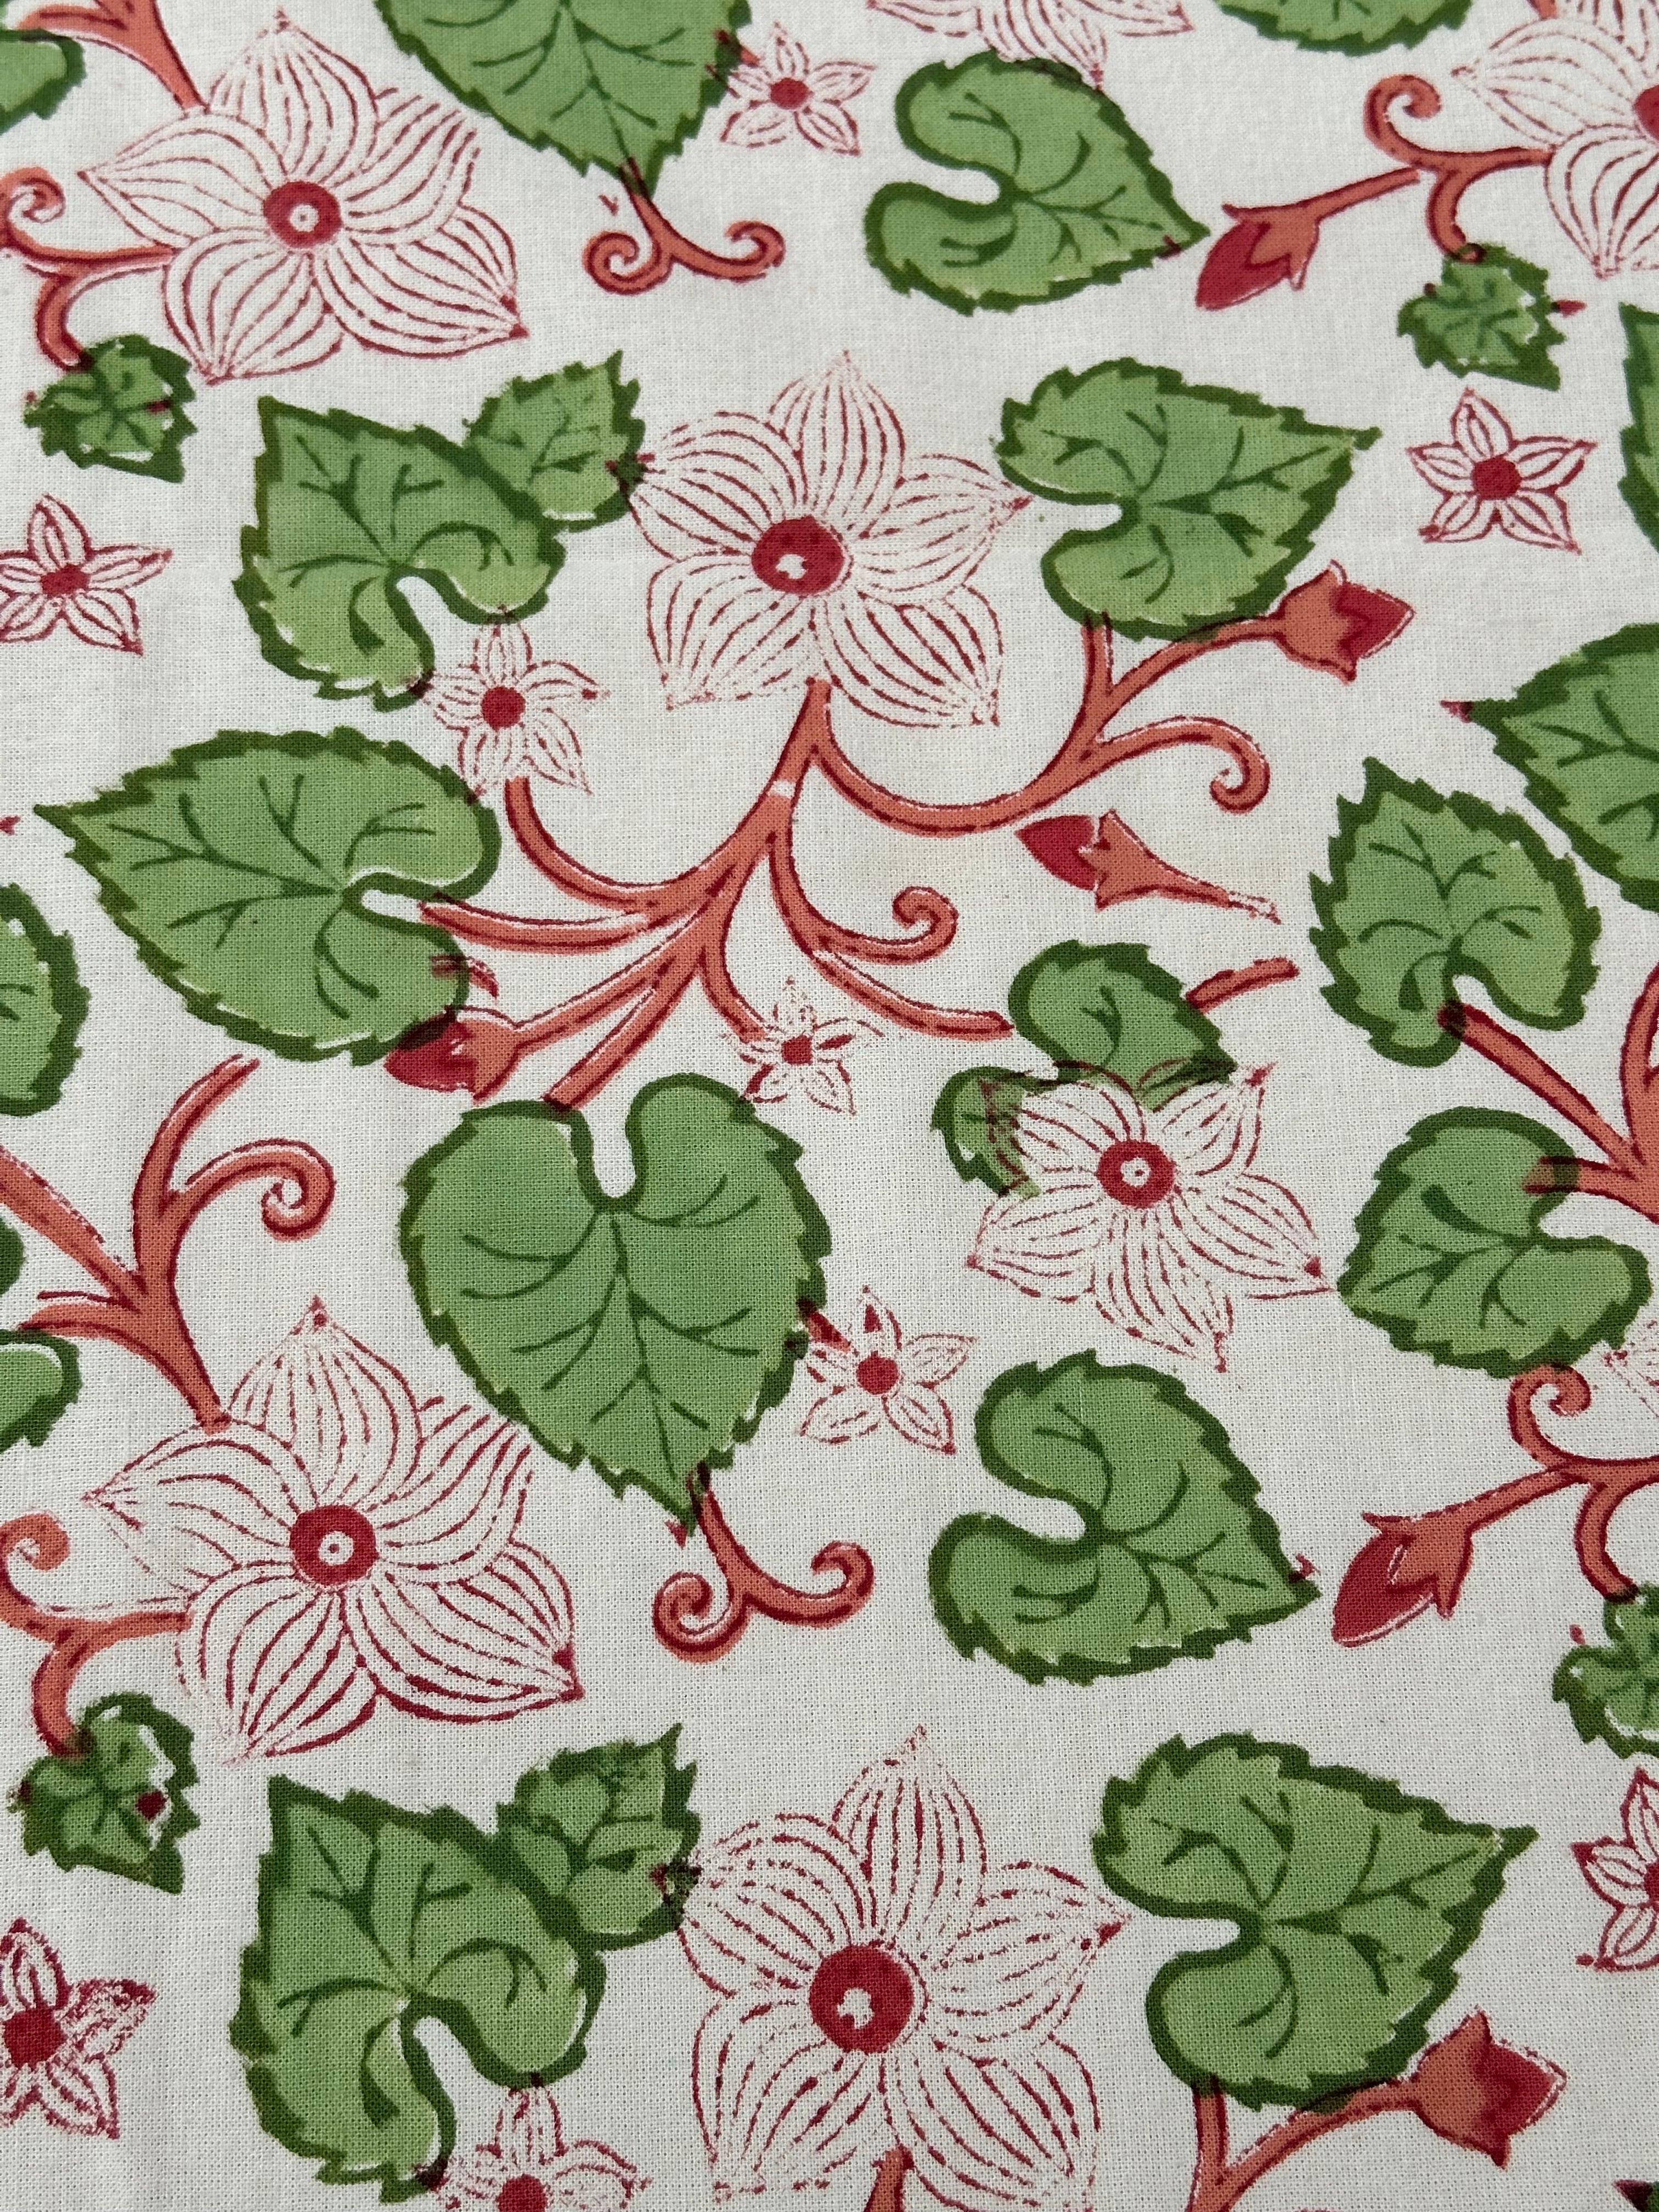 Passion Flower Tablecloth